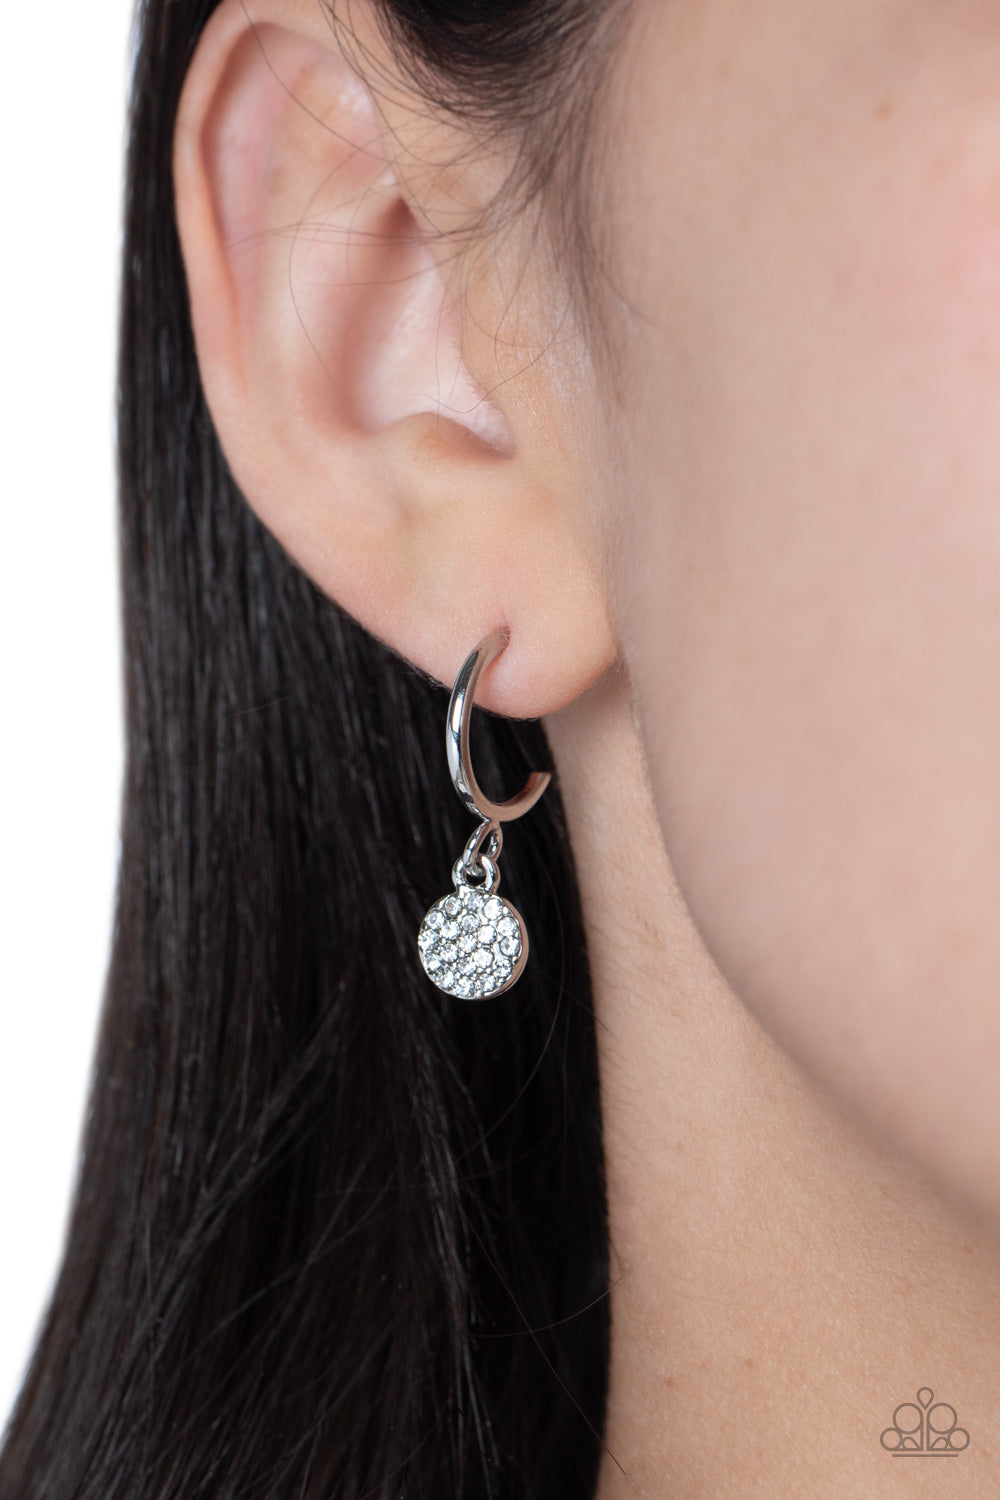 Paparazzi Accessories Bodacious Ballroom - White Swinging from a glistening silver hoop, a dainty silver disc, embossed with white rhinestones glimmers, adding a subtle shimmer around the ear. Earring attaches to a standard post fitting. Hoop measures app